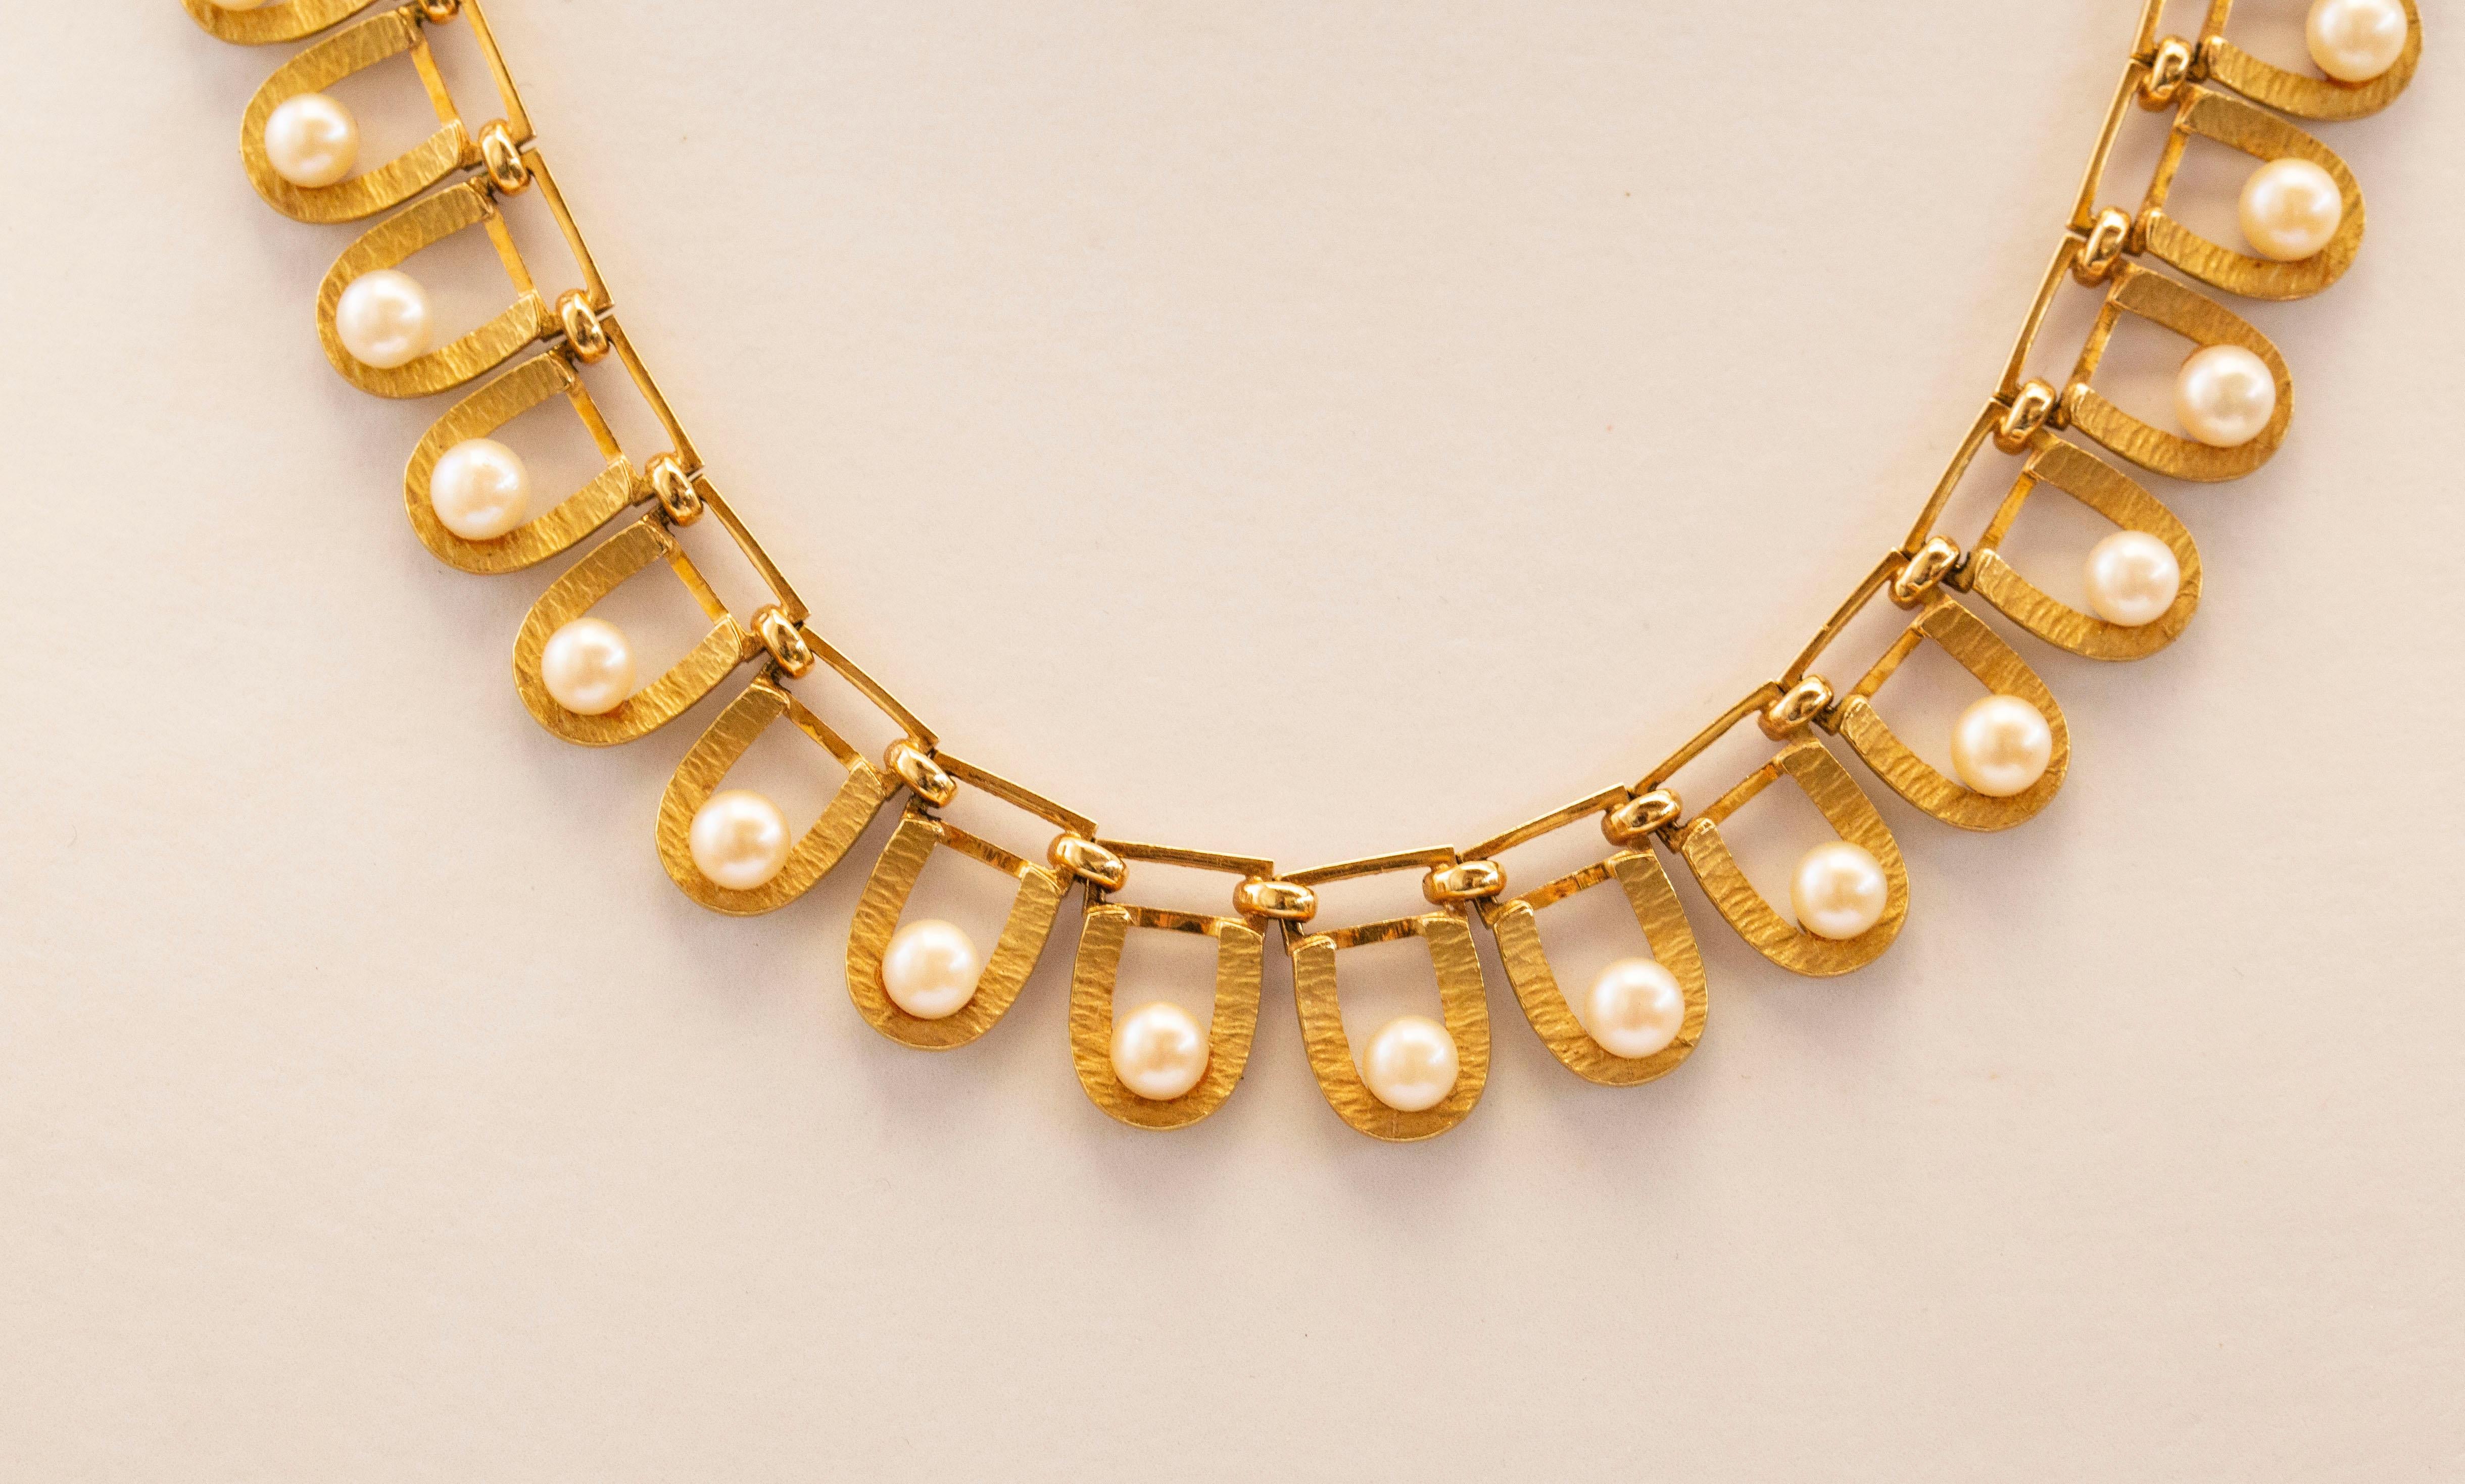 Women's 14 Karat Yellow Gold Choker Link Necklace with Cultivated Akoya Pearls 